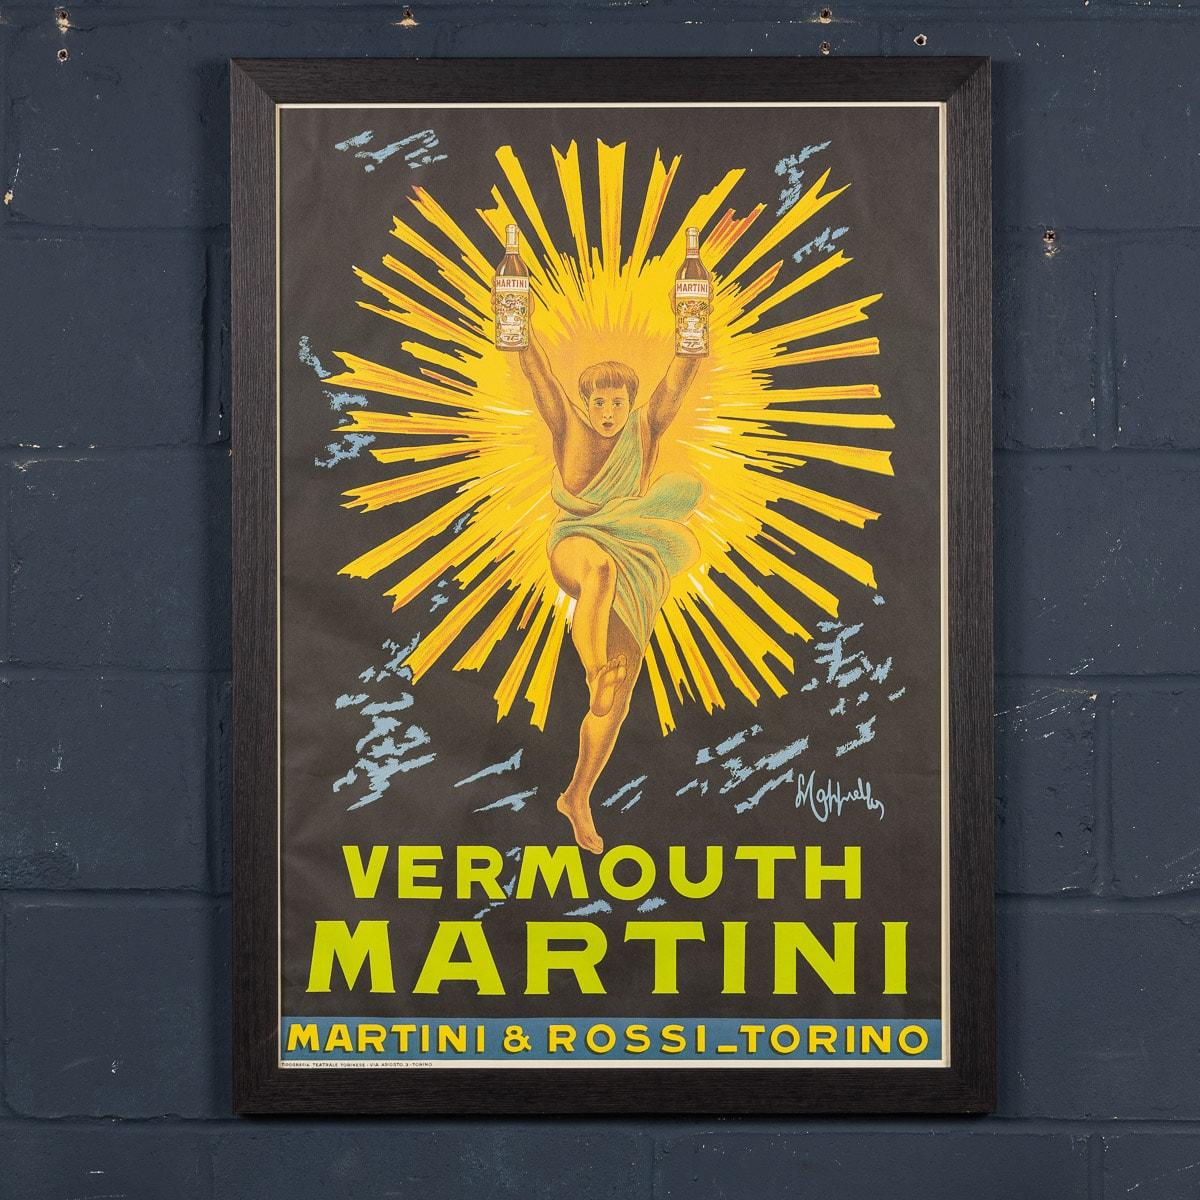 Beginning in the mid-19th century in Italy, Martini has become a multi-national beverage brand. Illustrated by the iconic poster designer Leonetto Cappiello, best known for his collaborations with many European liqueur brands including Campari as